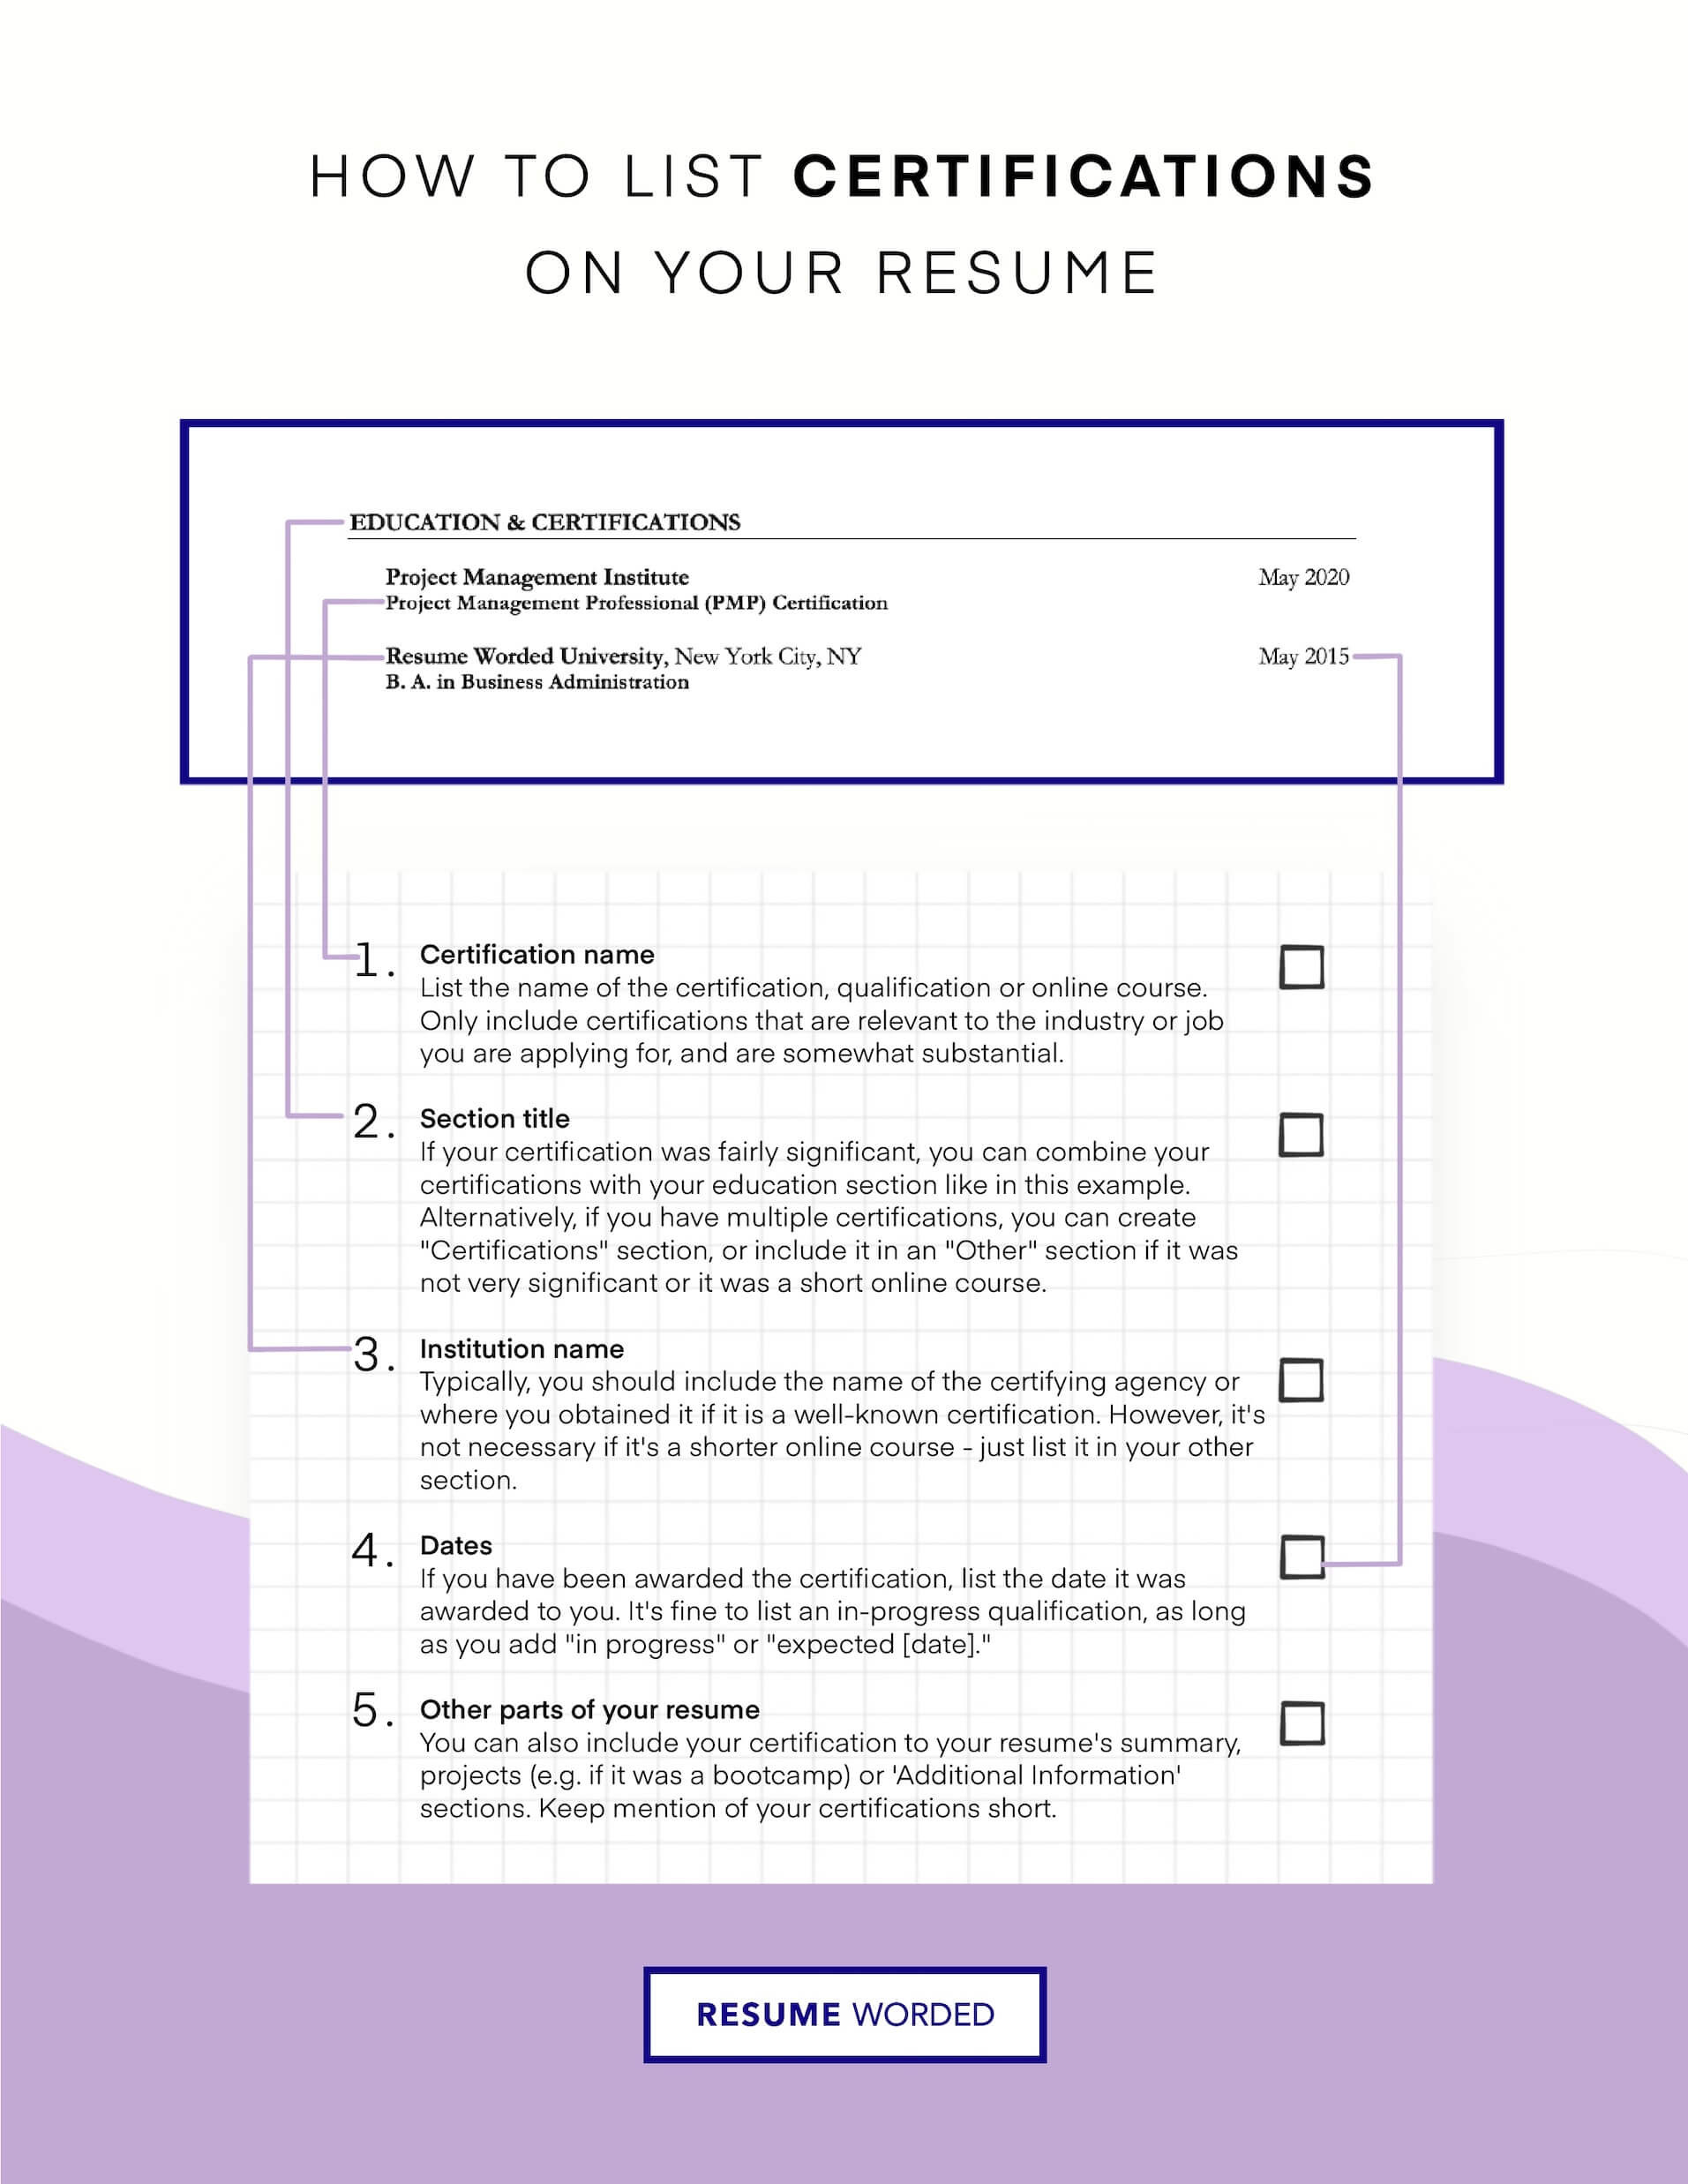 Prn Occupational therapy assistant Resume Sample Nicu Nurse Resume Example for 2022 Resume Worded